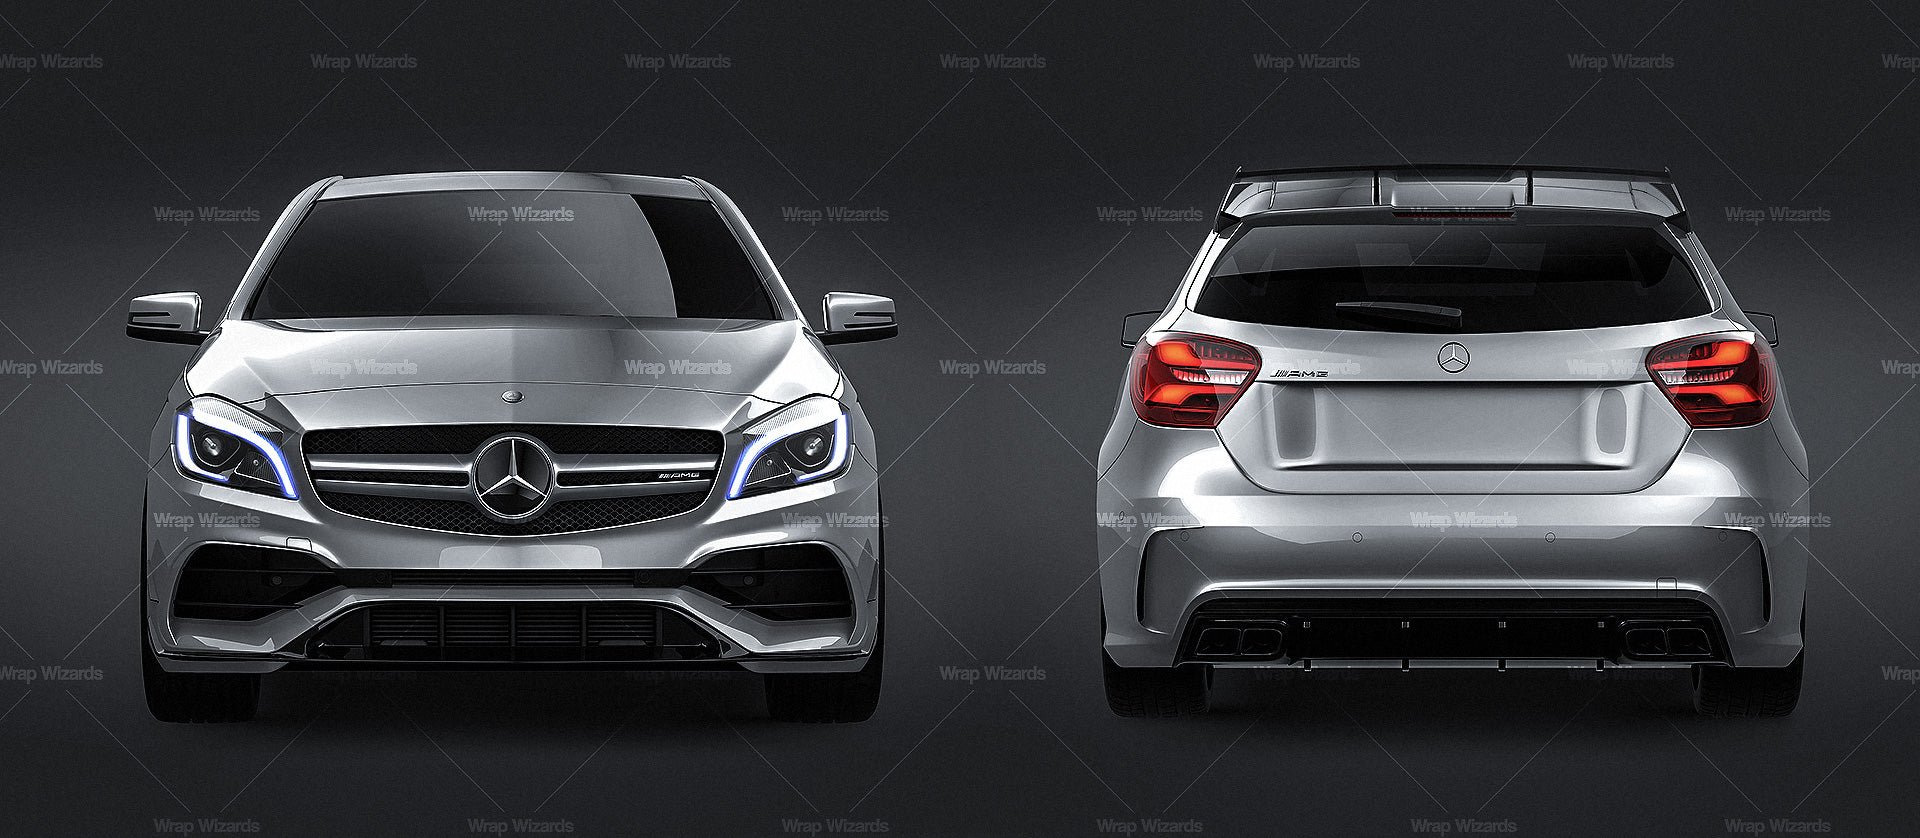 Mercedes-Benz A-Class A45 AMG 2017 glossy finish - all sides Car Mockup Template.psd